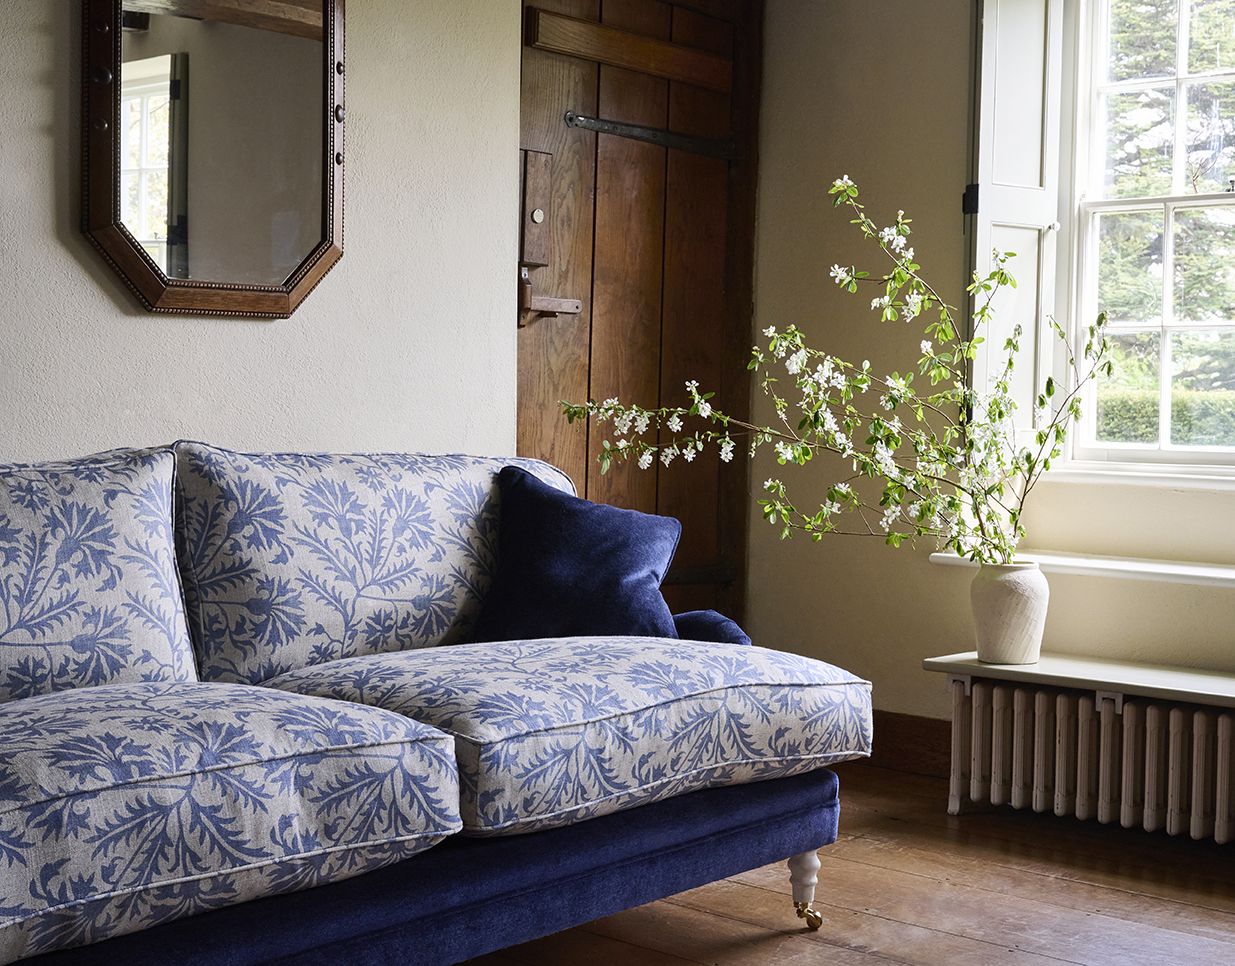 Sofas & Stuff Coates 3 Seater Sofa in Mohair Indigo with Seat and Back Cushions in RHS 23 Gertrude Jekyll Blue